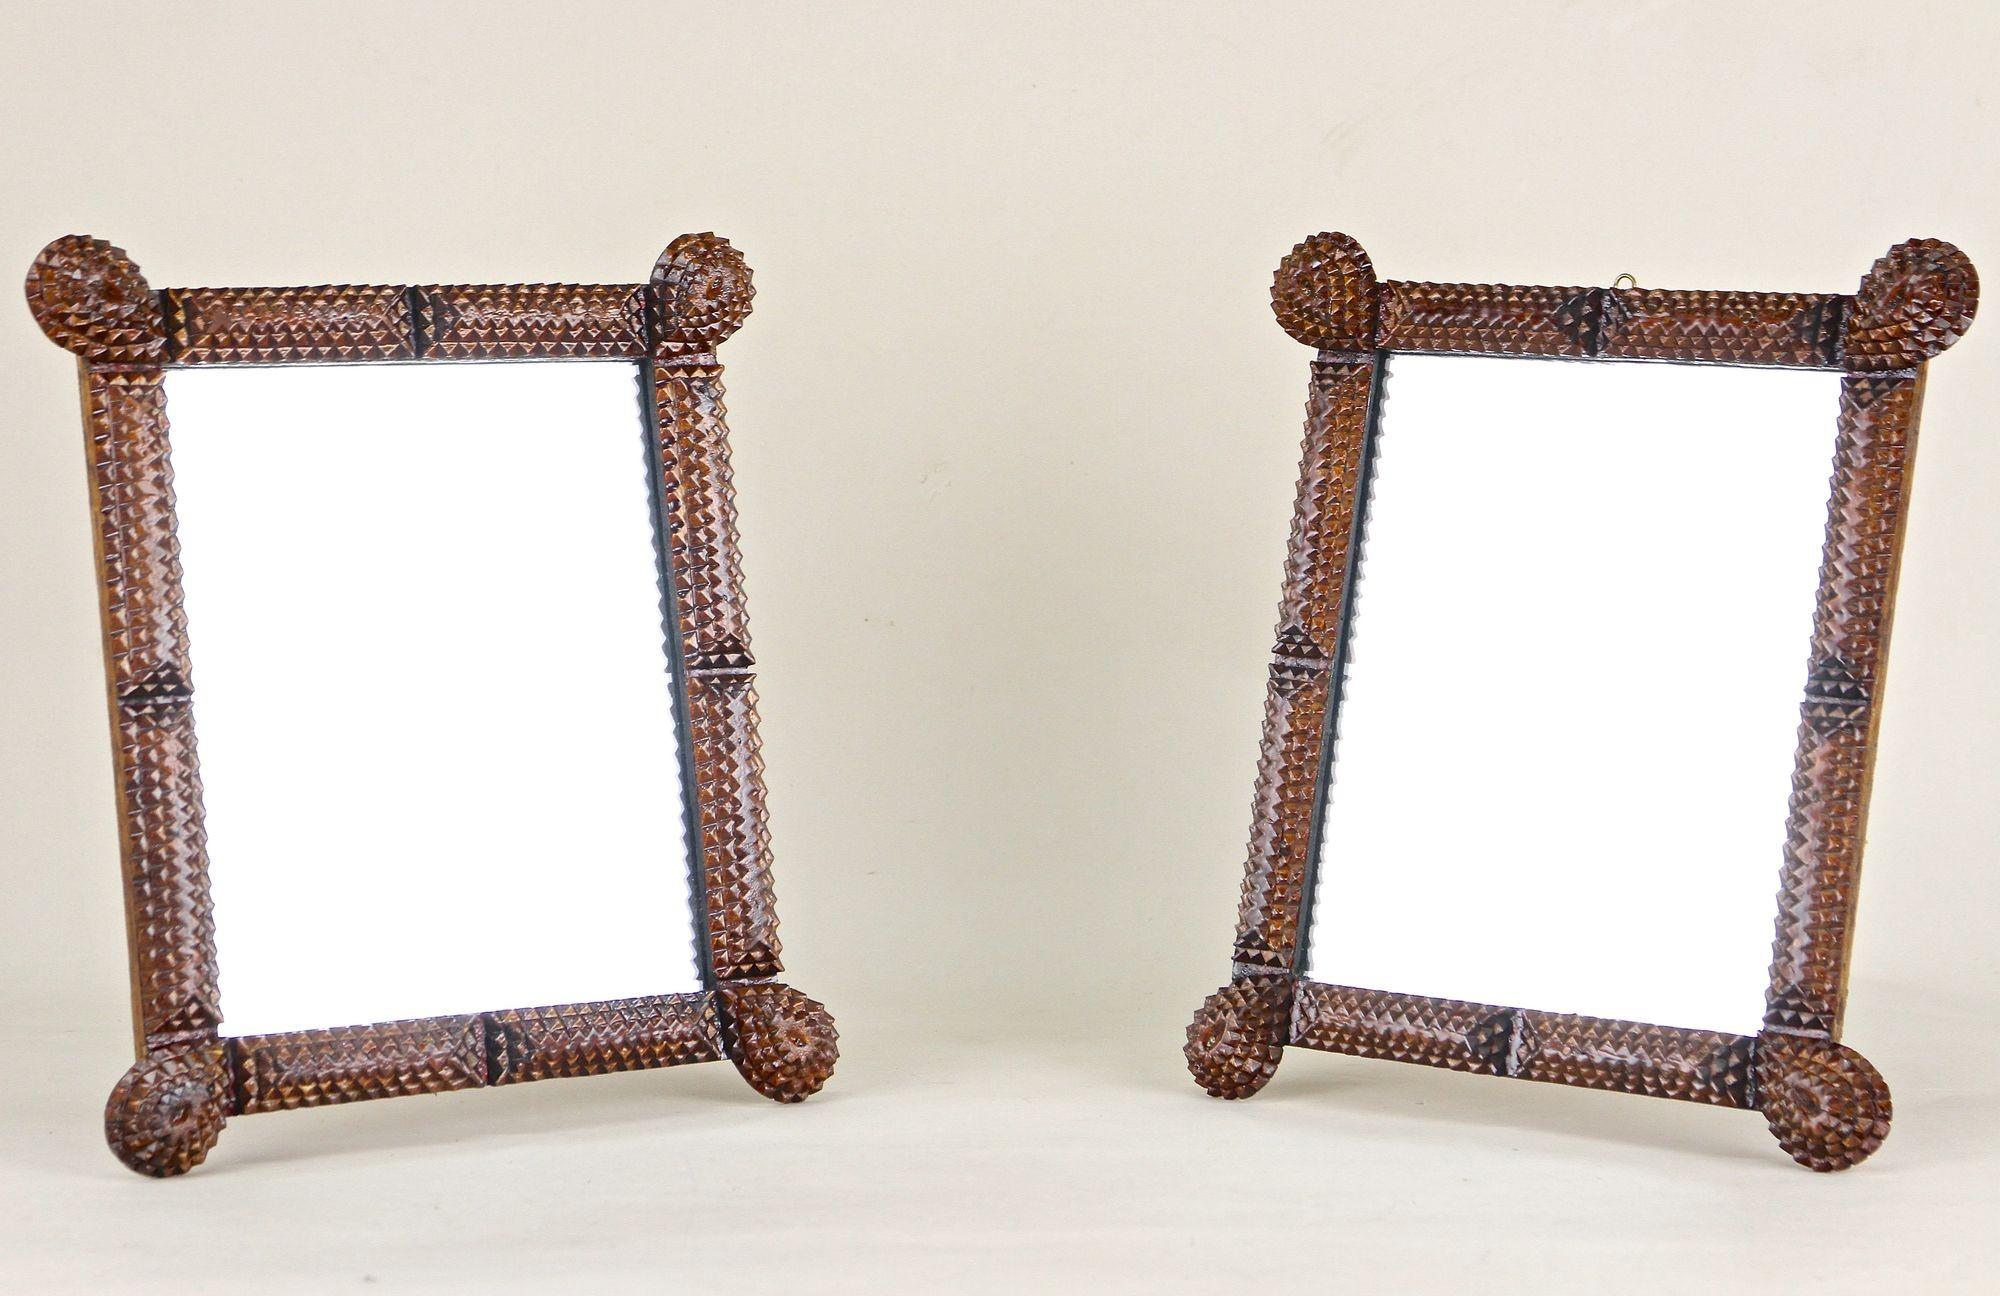 Exceptional set of two small Tramp Art wall mirrors from the period in Austria around 1870. Elaborately hand carved out of basswood, this beautiful antique rustic mirors were made in the so-called 